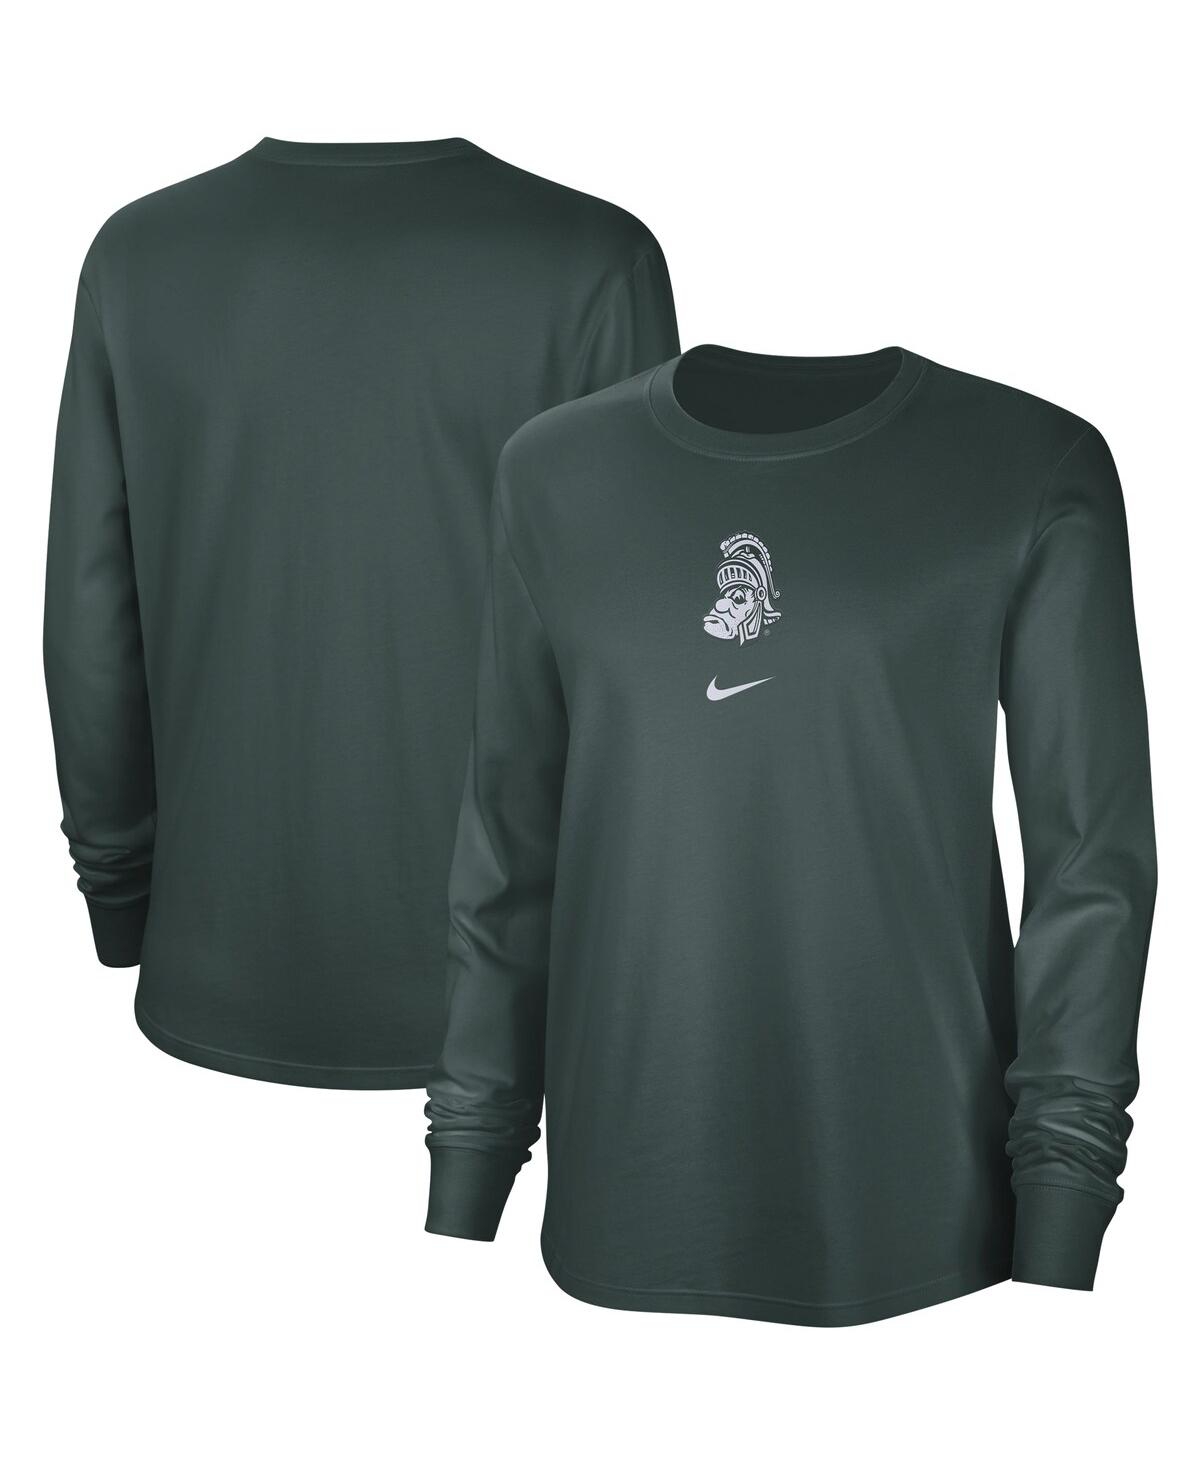 Nike Women's  Green Distressed Michigan State Spartans Vintage-like Long Sleeve T-shirt